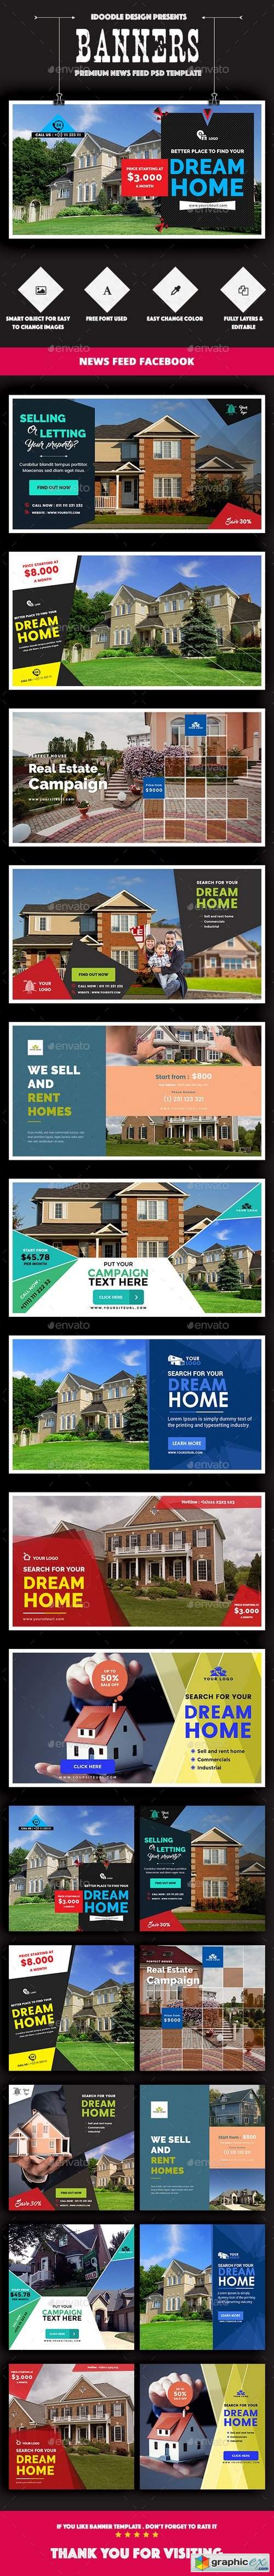 Facebook Real Estate Banners Ads - 20 PSD [2 Size Each]